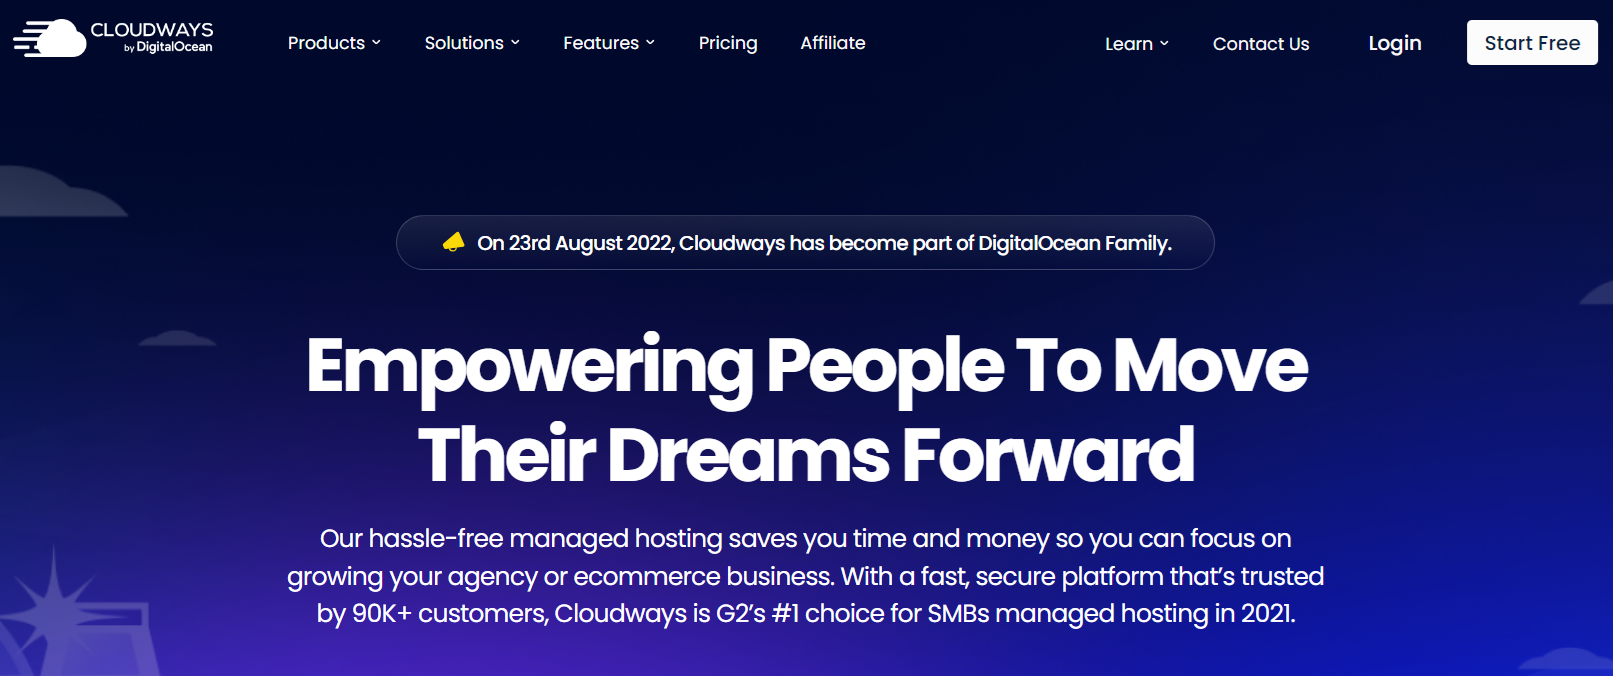 cloudways about us page